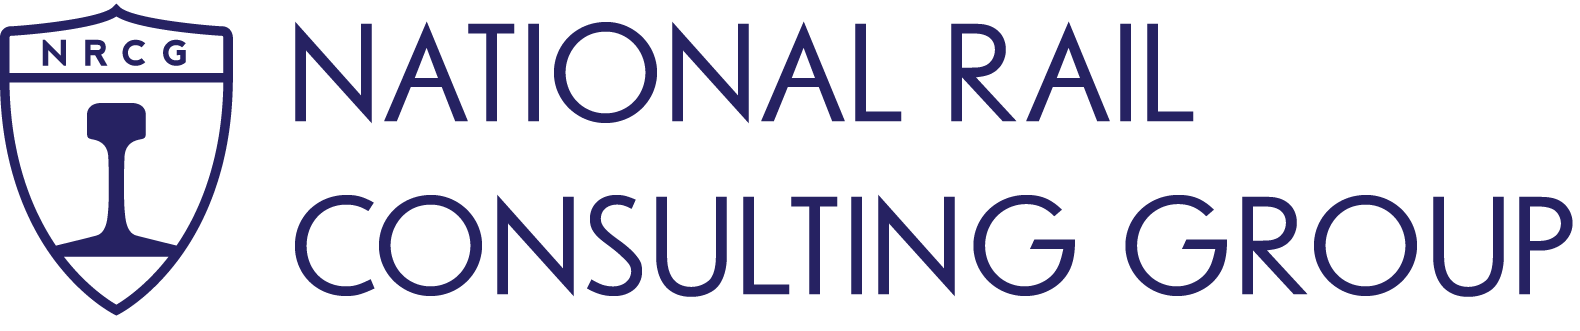 National Rail Consulting Group